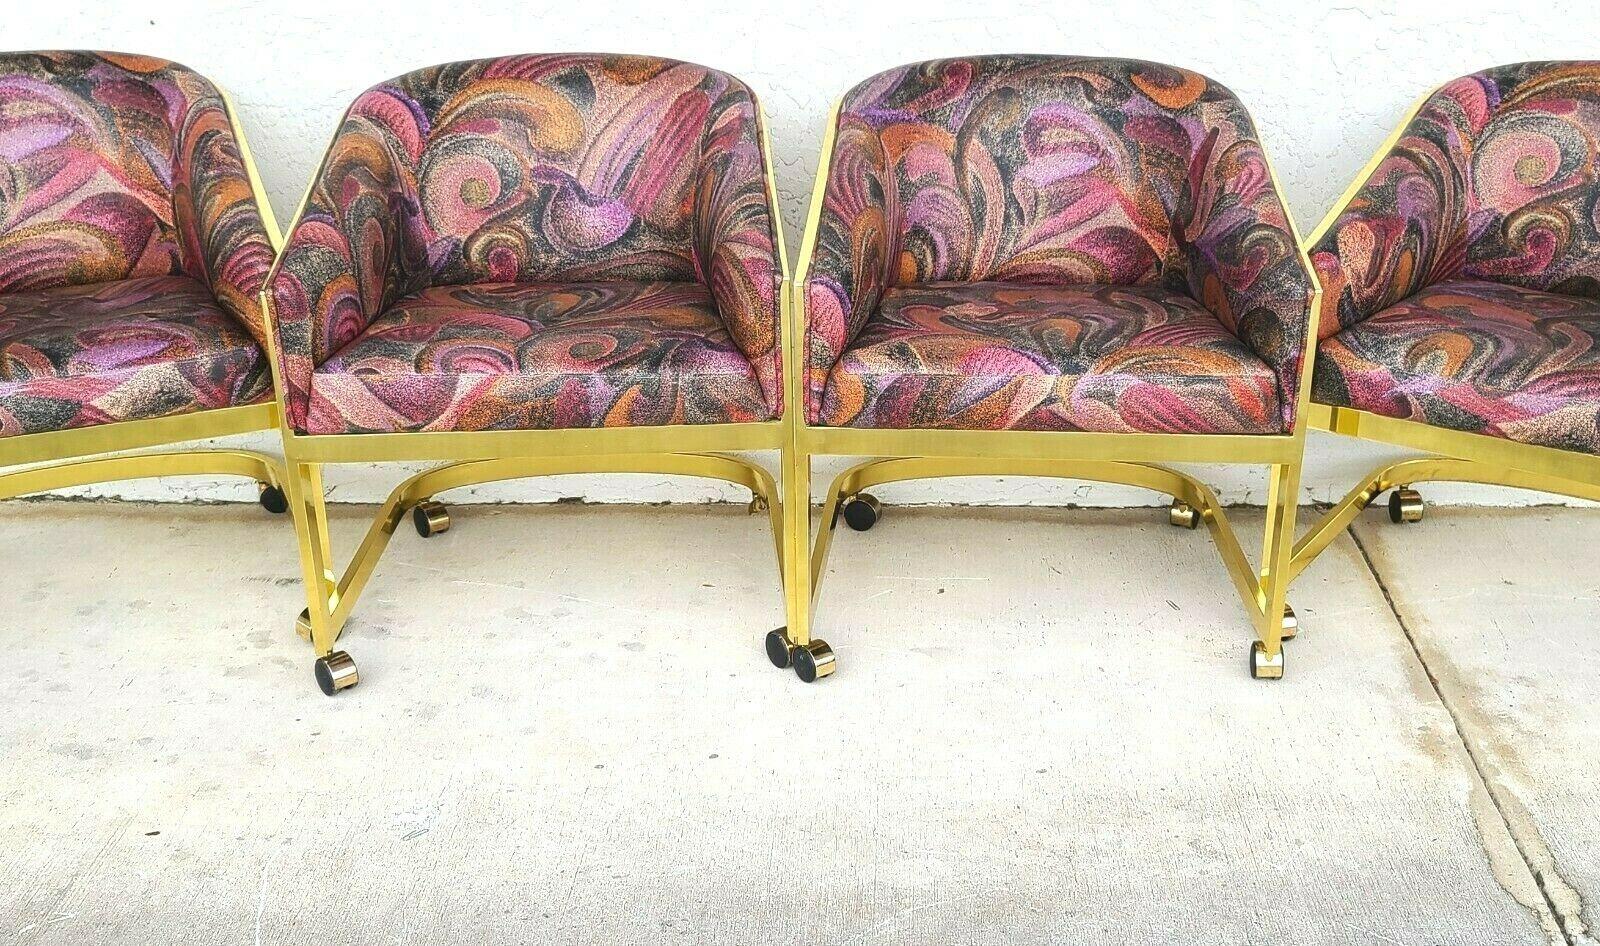 Offering One Of Our Recent Palm Beach Estate Fine Furniture Acquisitions Of A Set of 4 Design Institute of America Rolling Gaming dining club chairs

Approximate Measurements in Inches
29